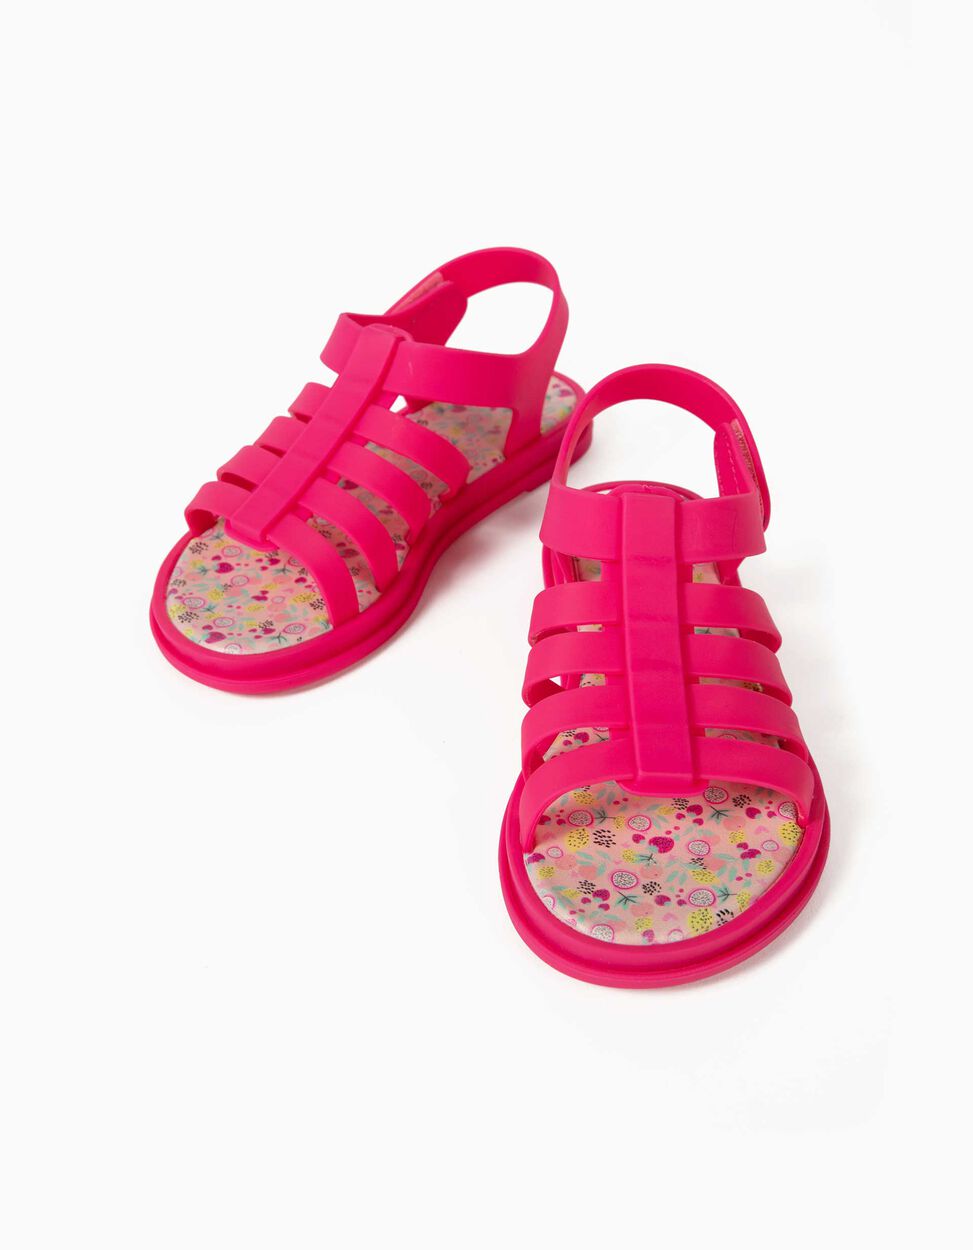 Sandales Fille Minnie Zy Delicious Rose Zippy Online